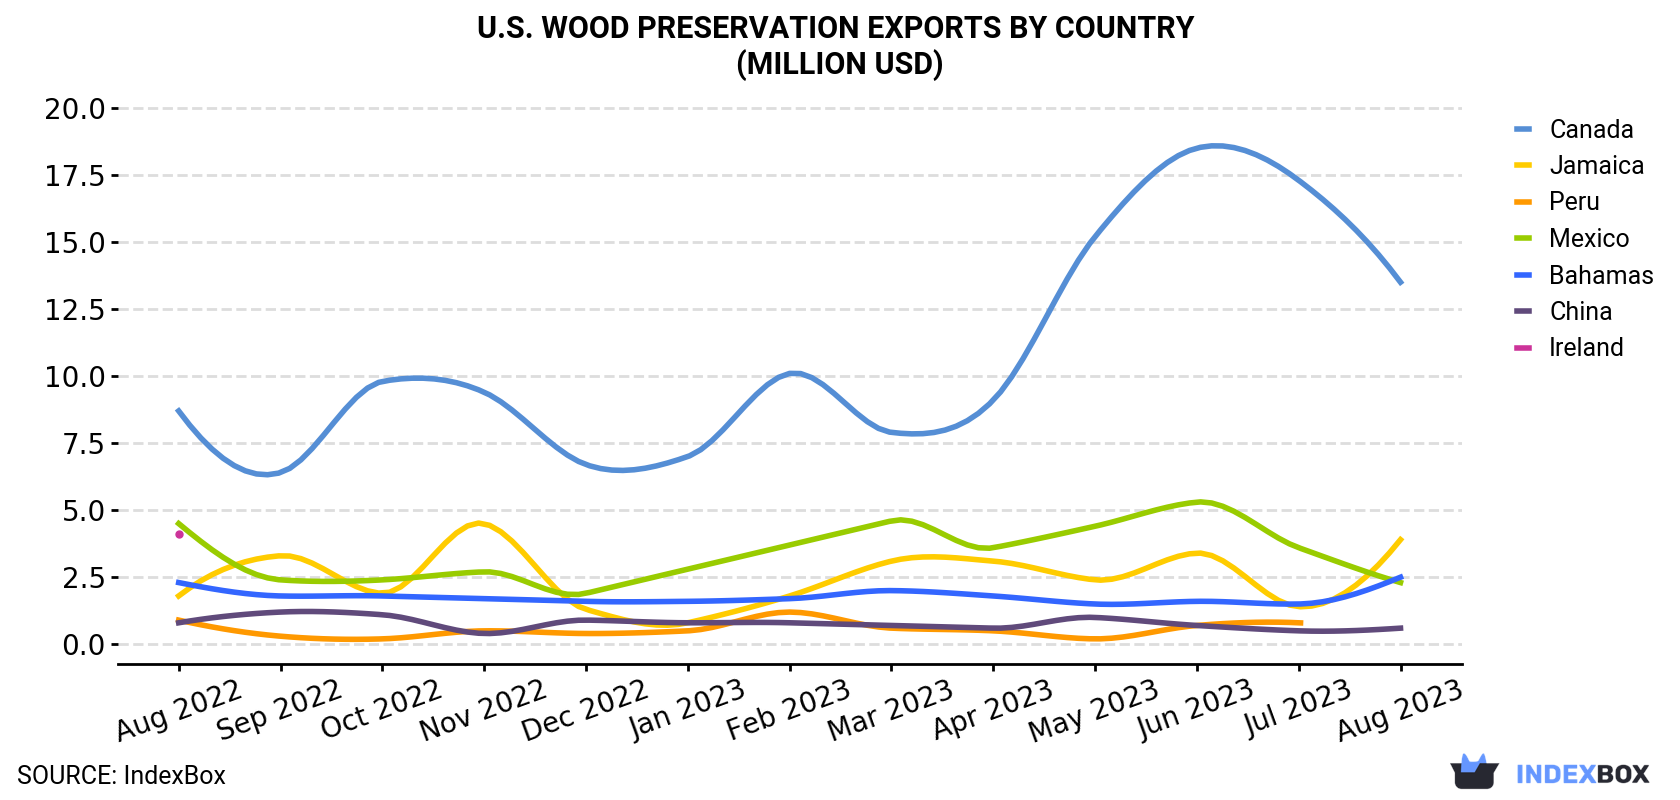 U.S. Wood Preservation Exports By Country (Million USD)